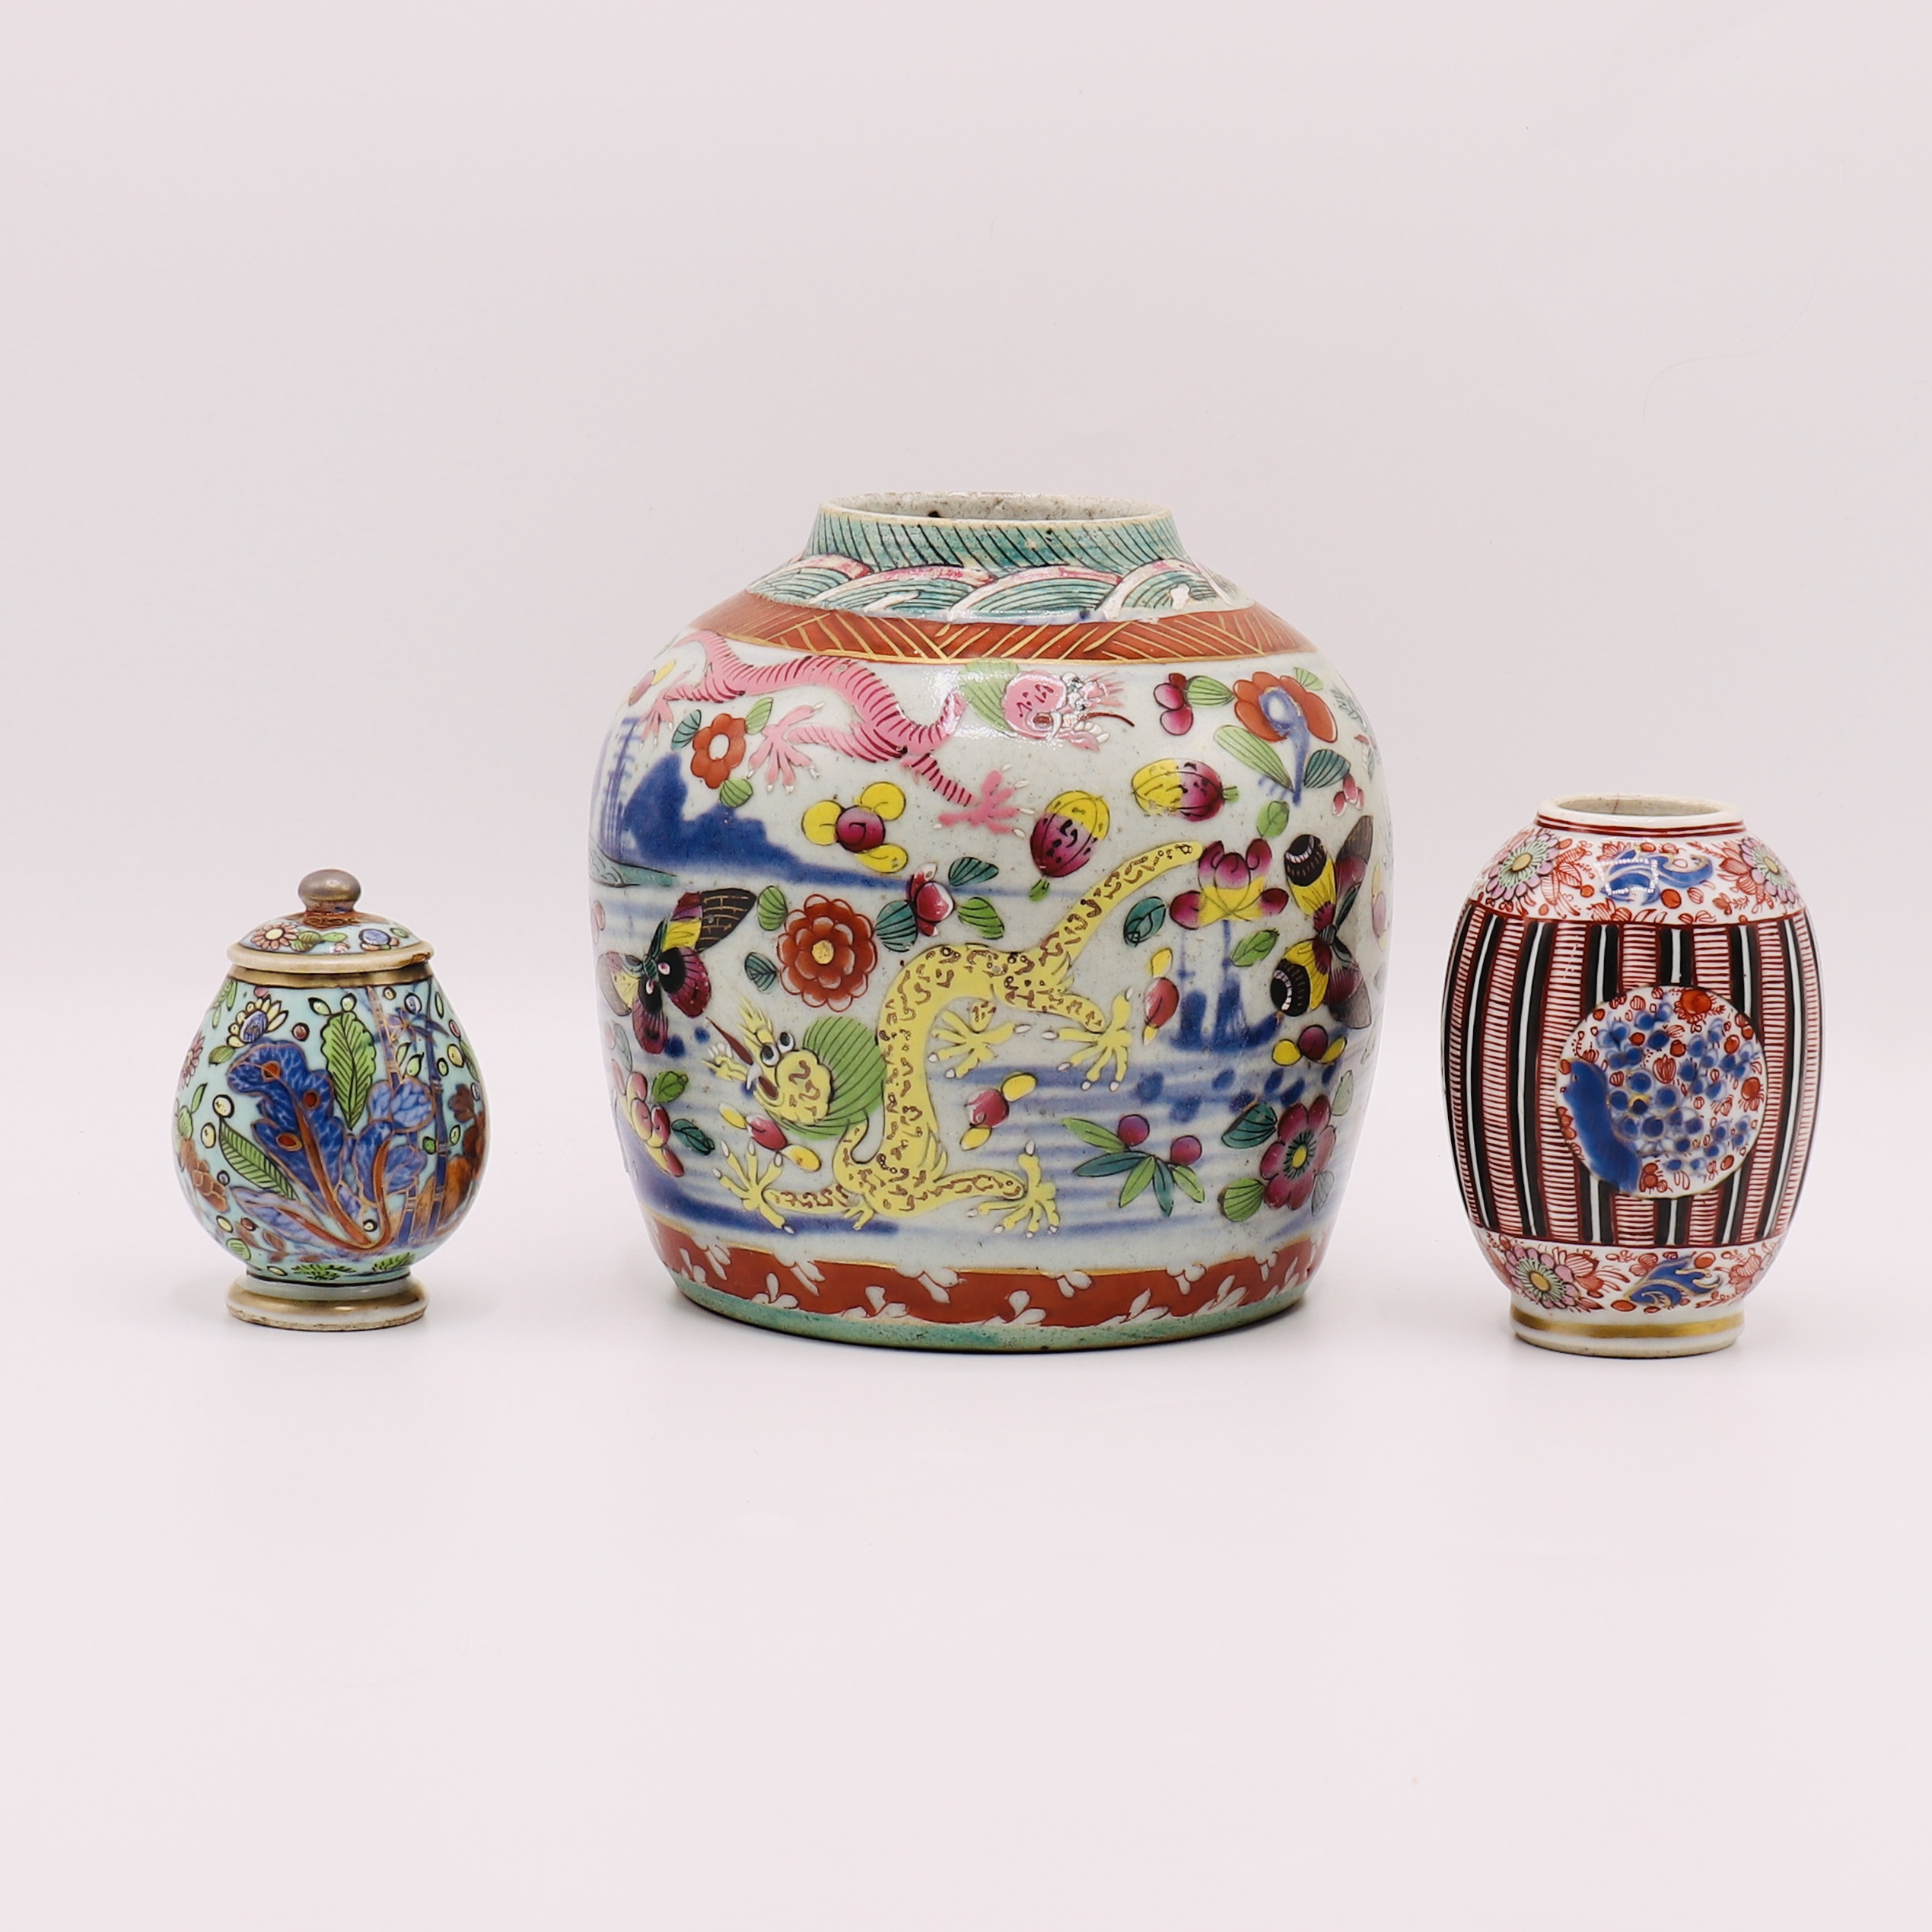 THREE CHINESE FAMILLE ROSE JARS, QING DYNASTY (1644-1911) - Image 3 of 5